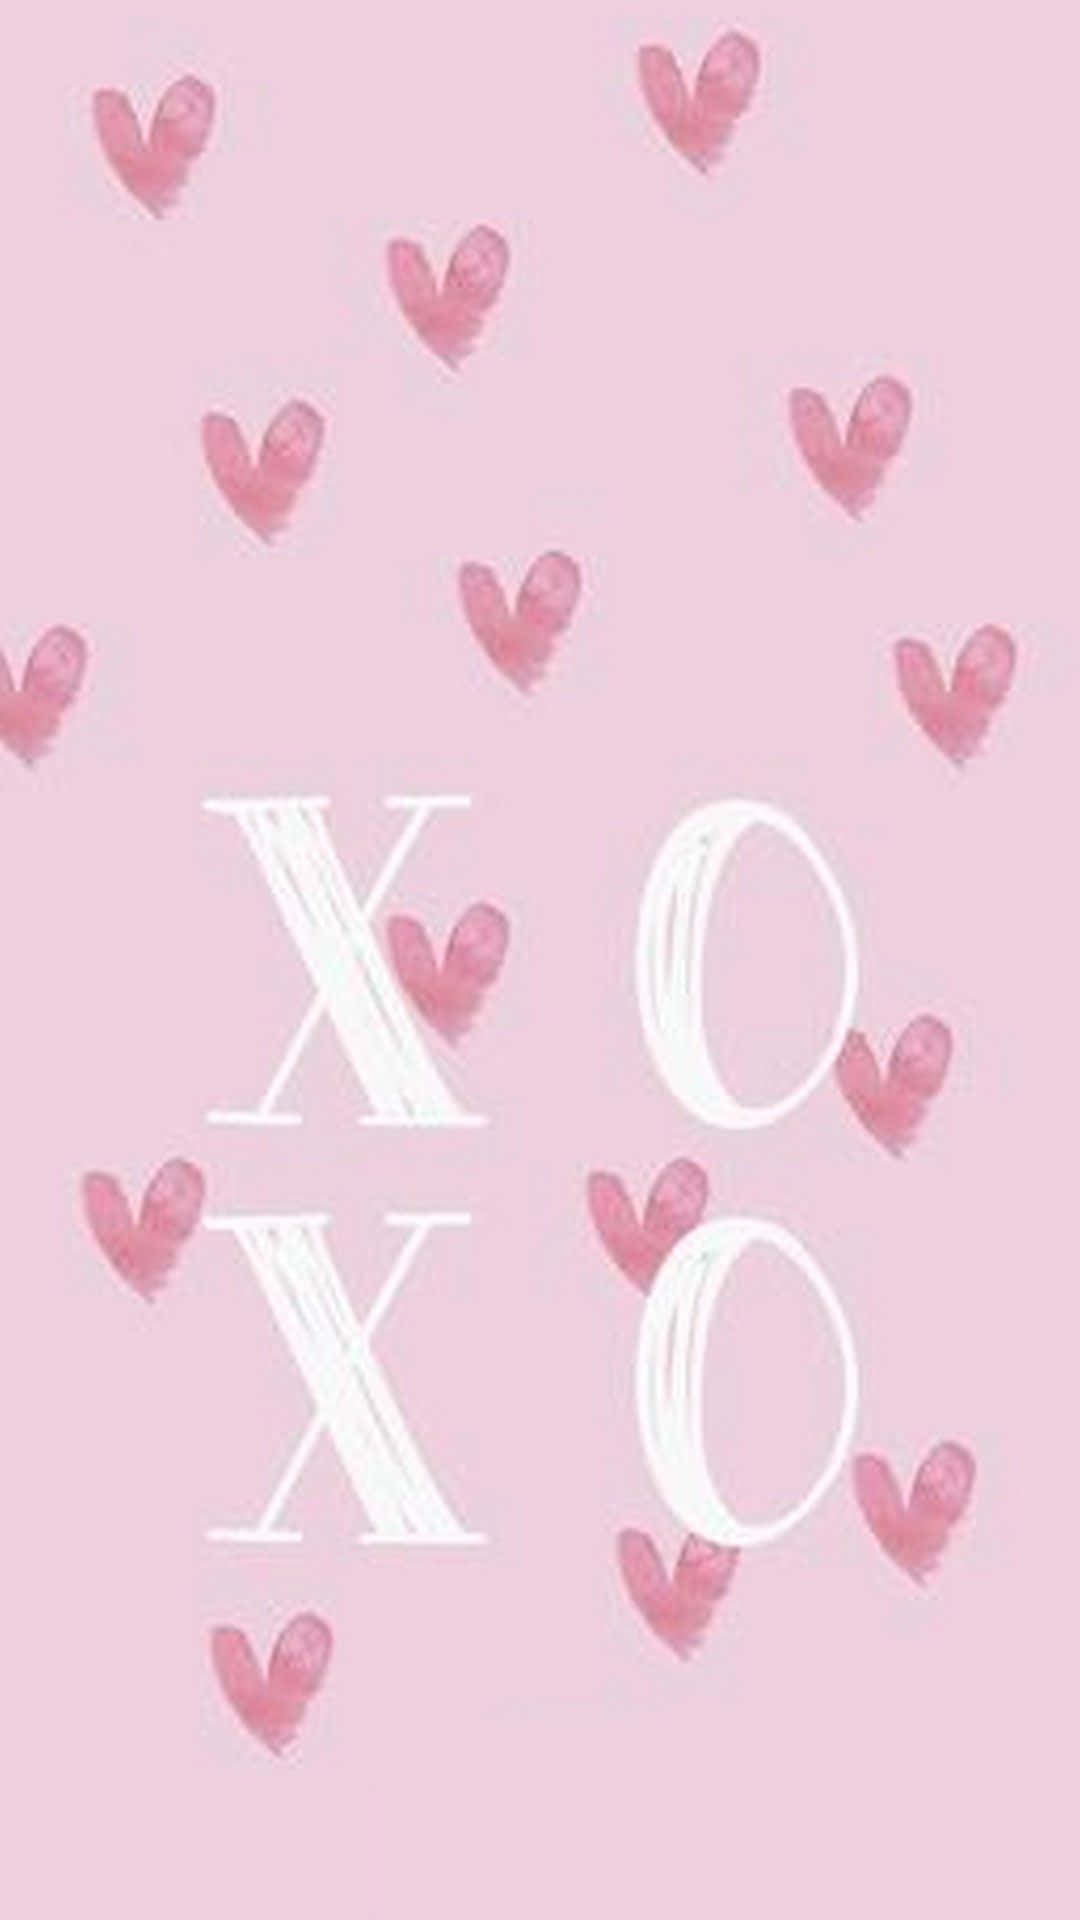 Celebrate Love with an Iphone this Valentines Day Wallpaper